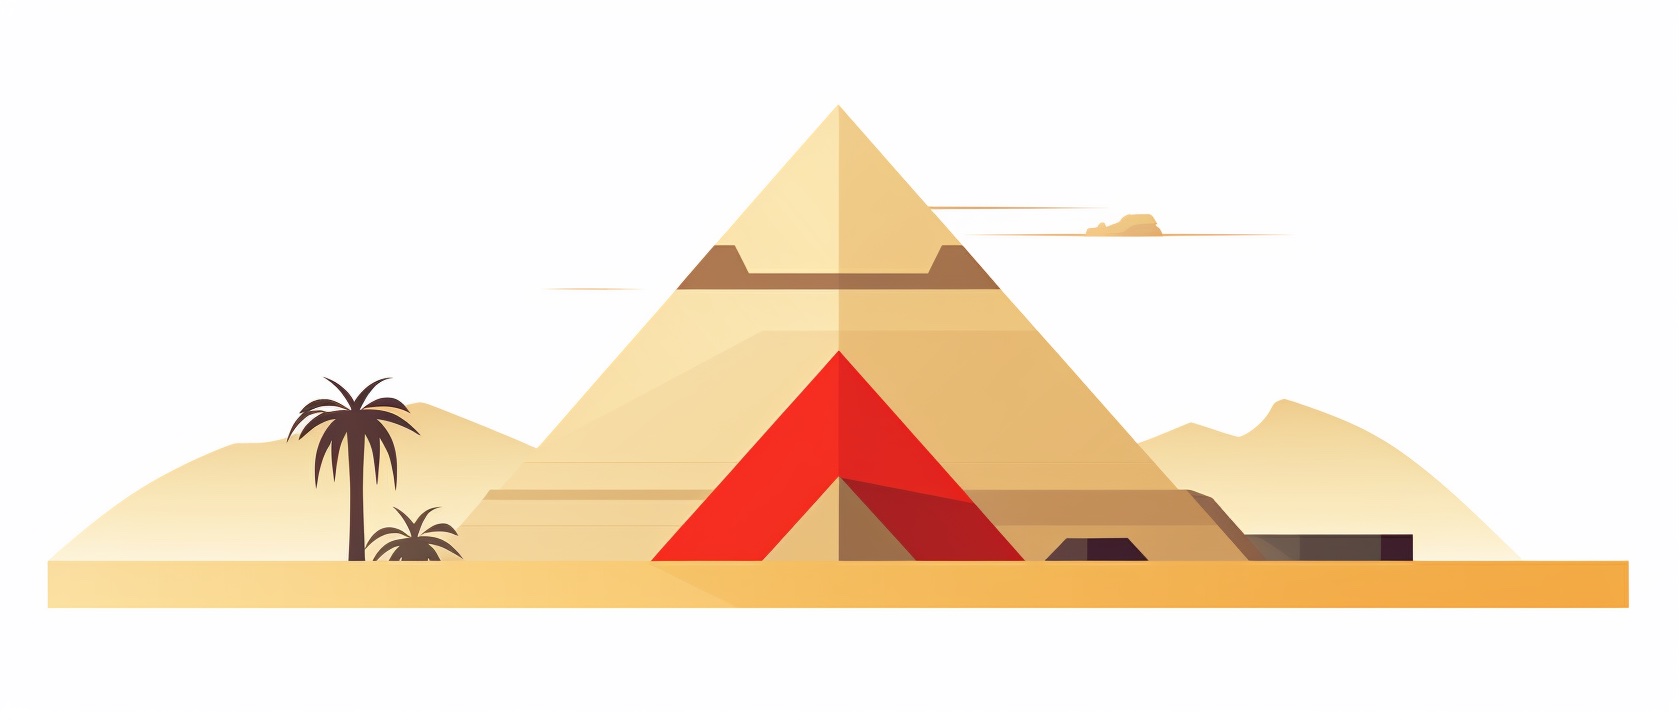 pyramids in ancient egypt